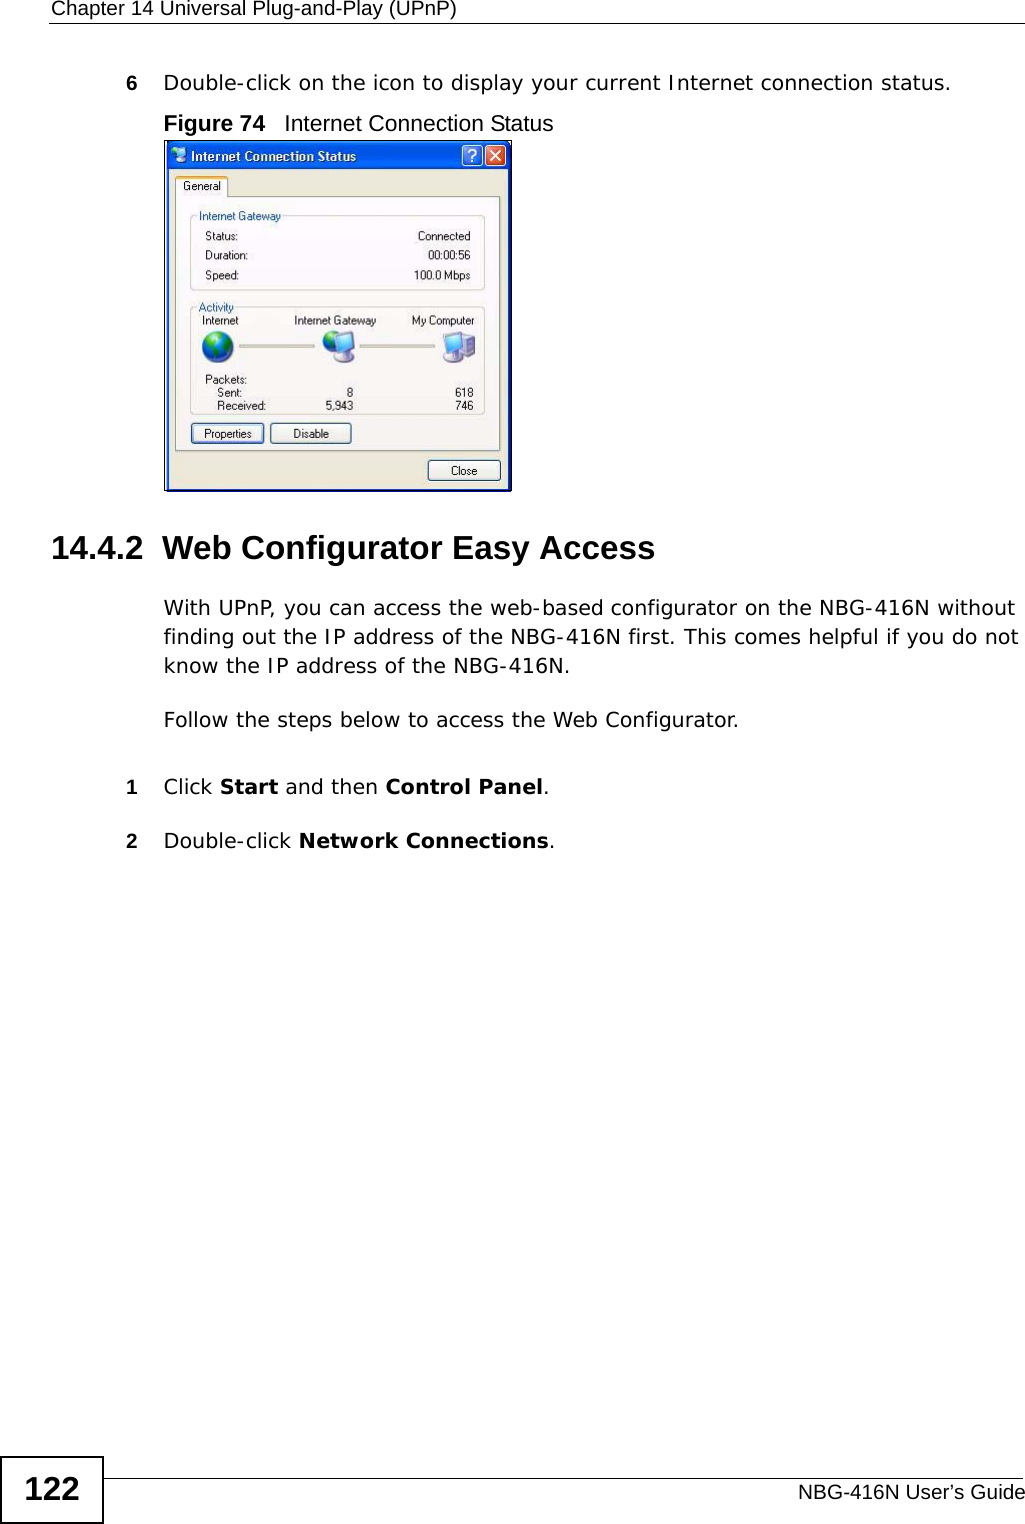 Chapter 14 Universal Plug-and-Play (UPnP)NBG-416N User’s Guide1226Double-click on the icon to display your current Internet connection status.Figure 74   Internet Connection Status14.4.2  Web Configurator Easy AccessWith UPnP, you can access the web-based configurator on the NBG-416N without finding out the IP address of the NBG-416N first. This comes helpful if you do not know the IP address of the NBG-416N.Follow the steps below to access the Web Configurator.1Click Start and then Control Panel. 2Double-click Network Connections. 